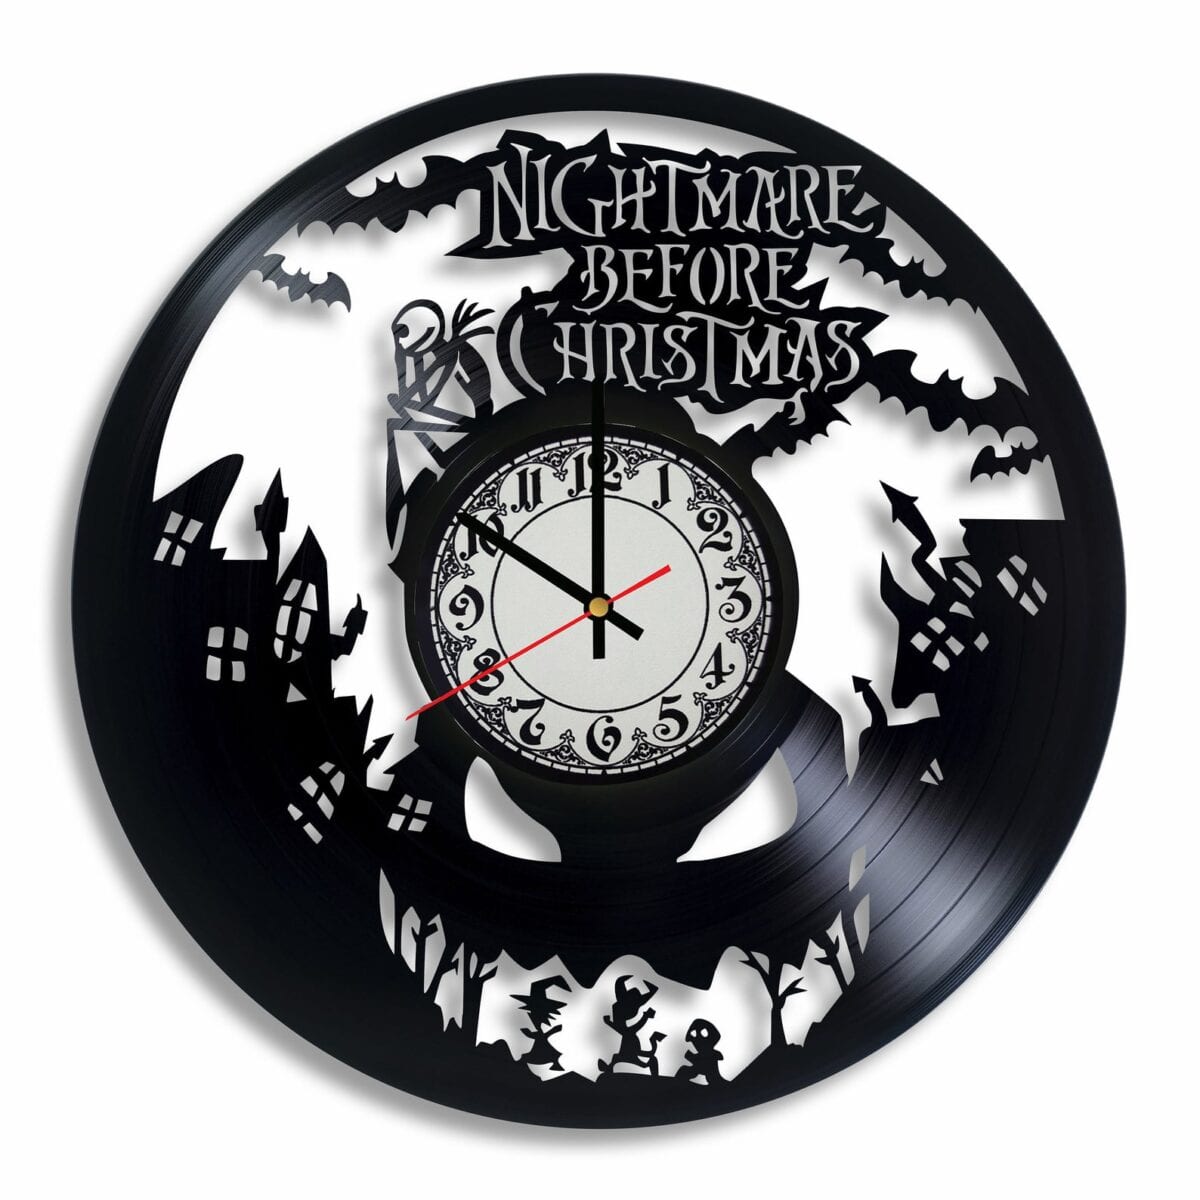 These Nightmare Before Christmas Clocks Are Made From Old Records and